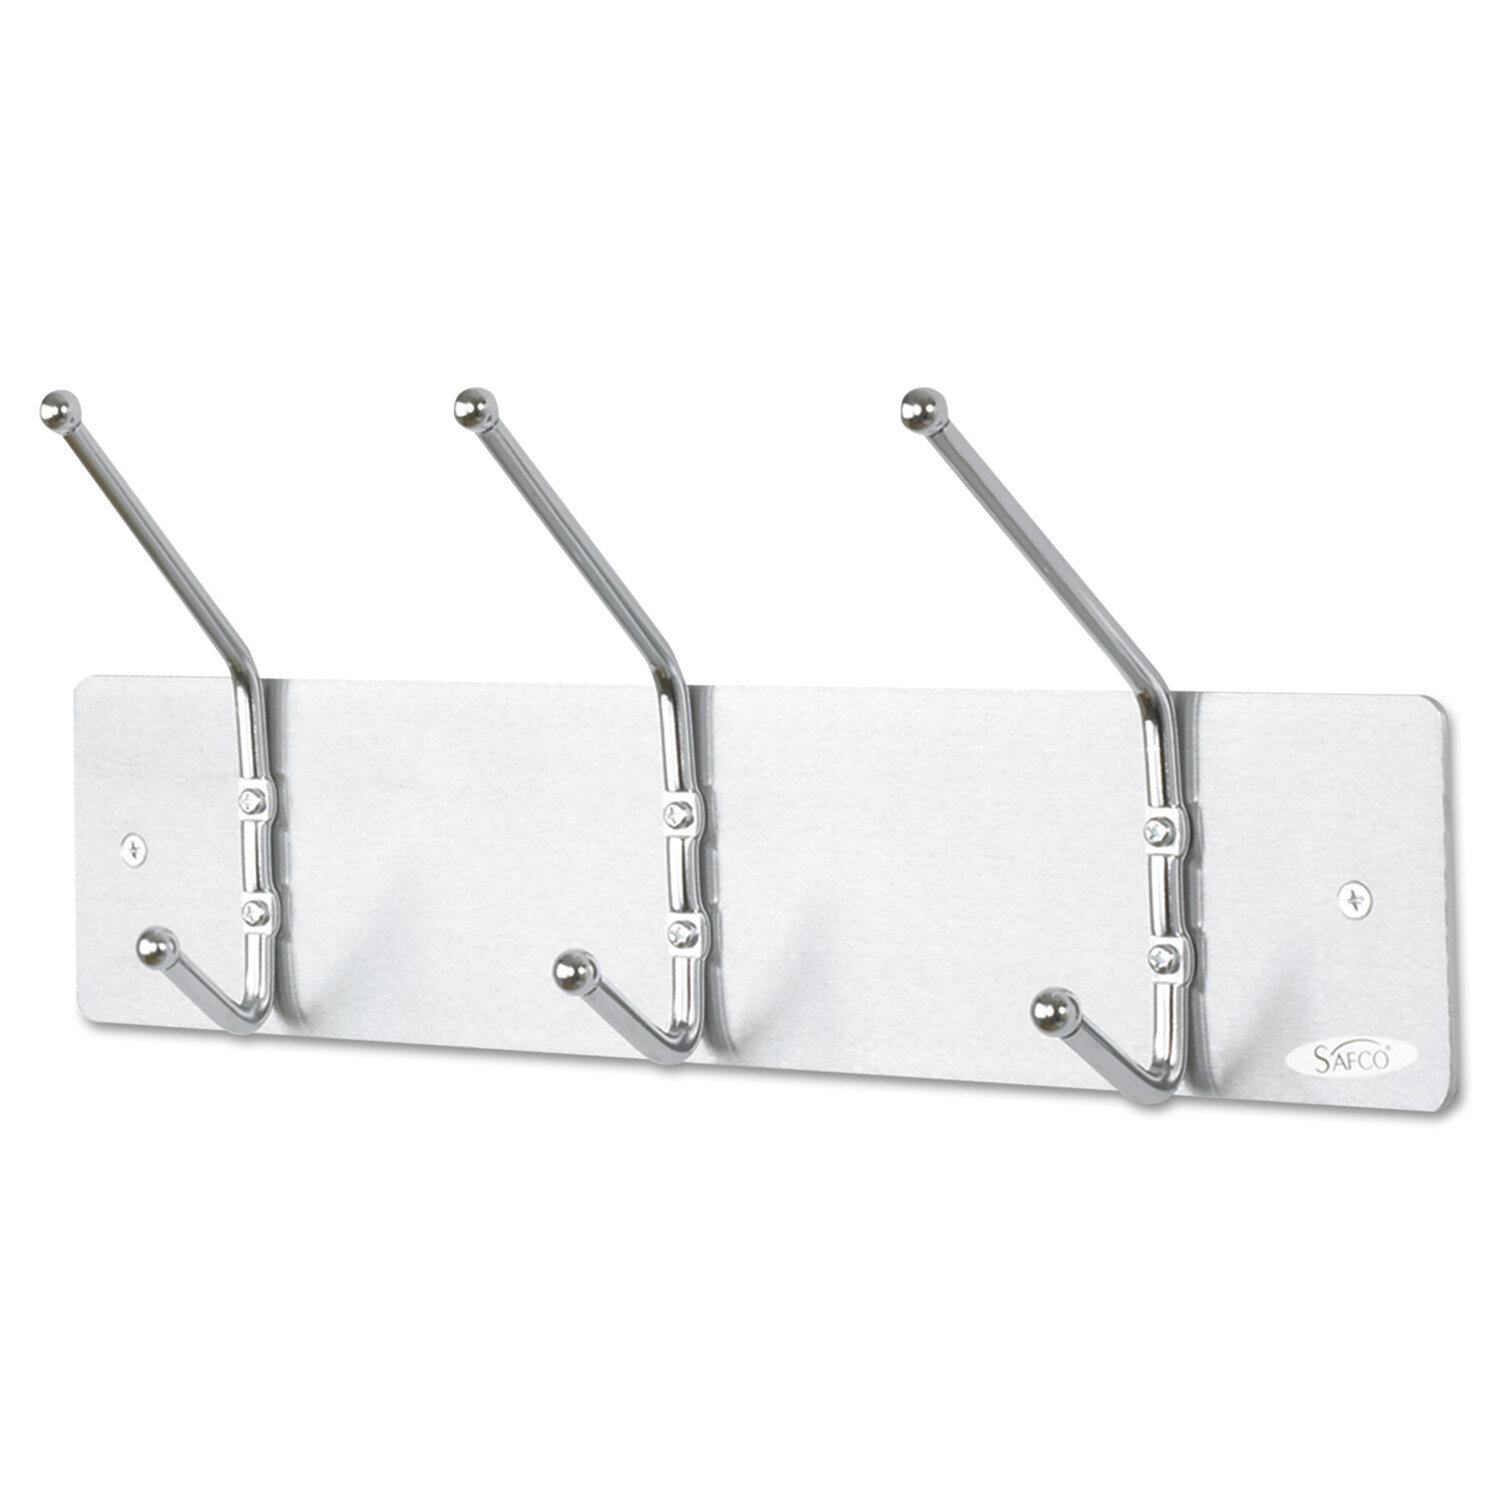 Safco Products Ball-Tipped Double-Hook Wall Mounted Coat Rack